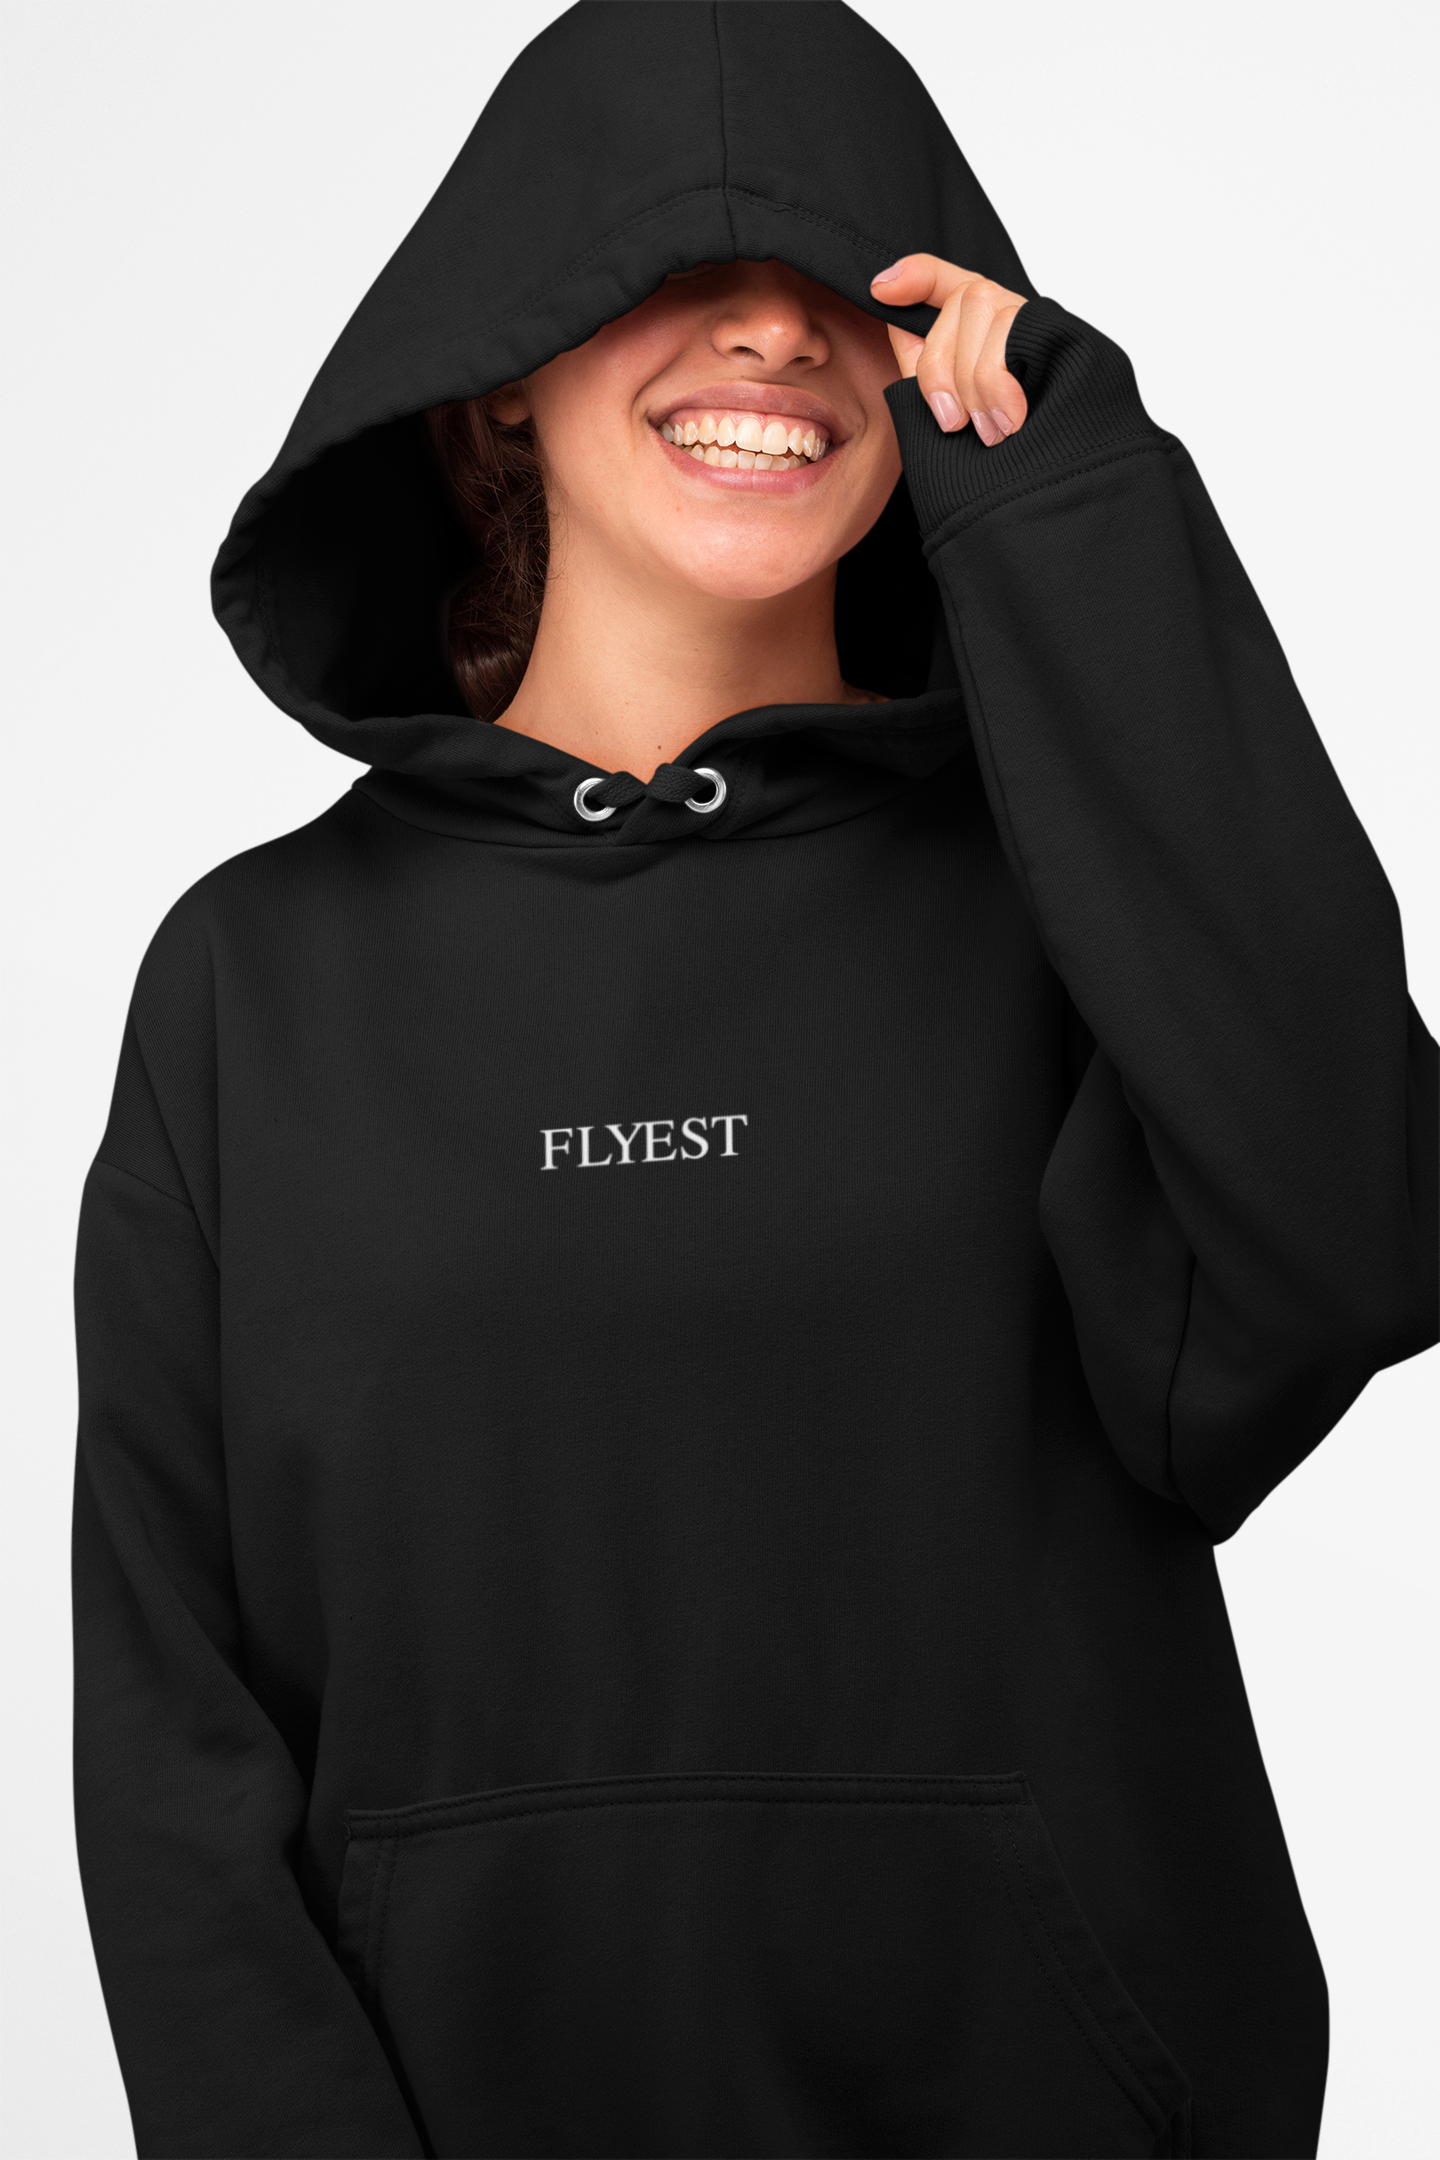 Flyest Large but Unseen Women's hoodie